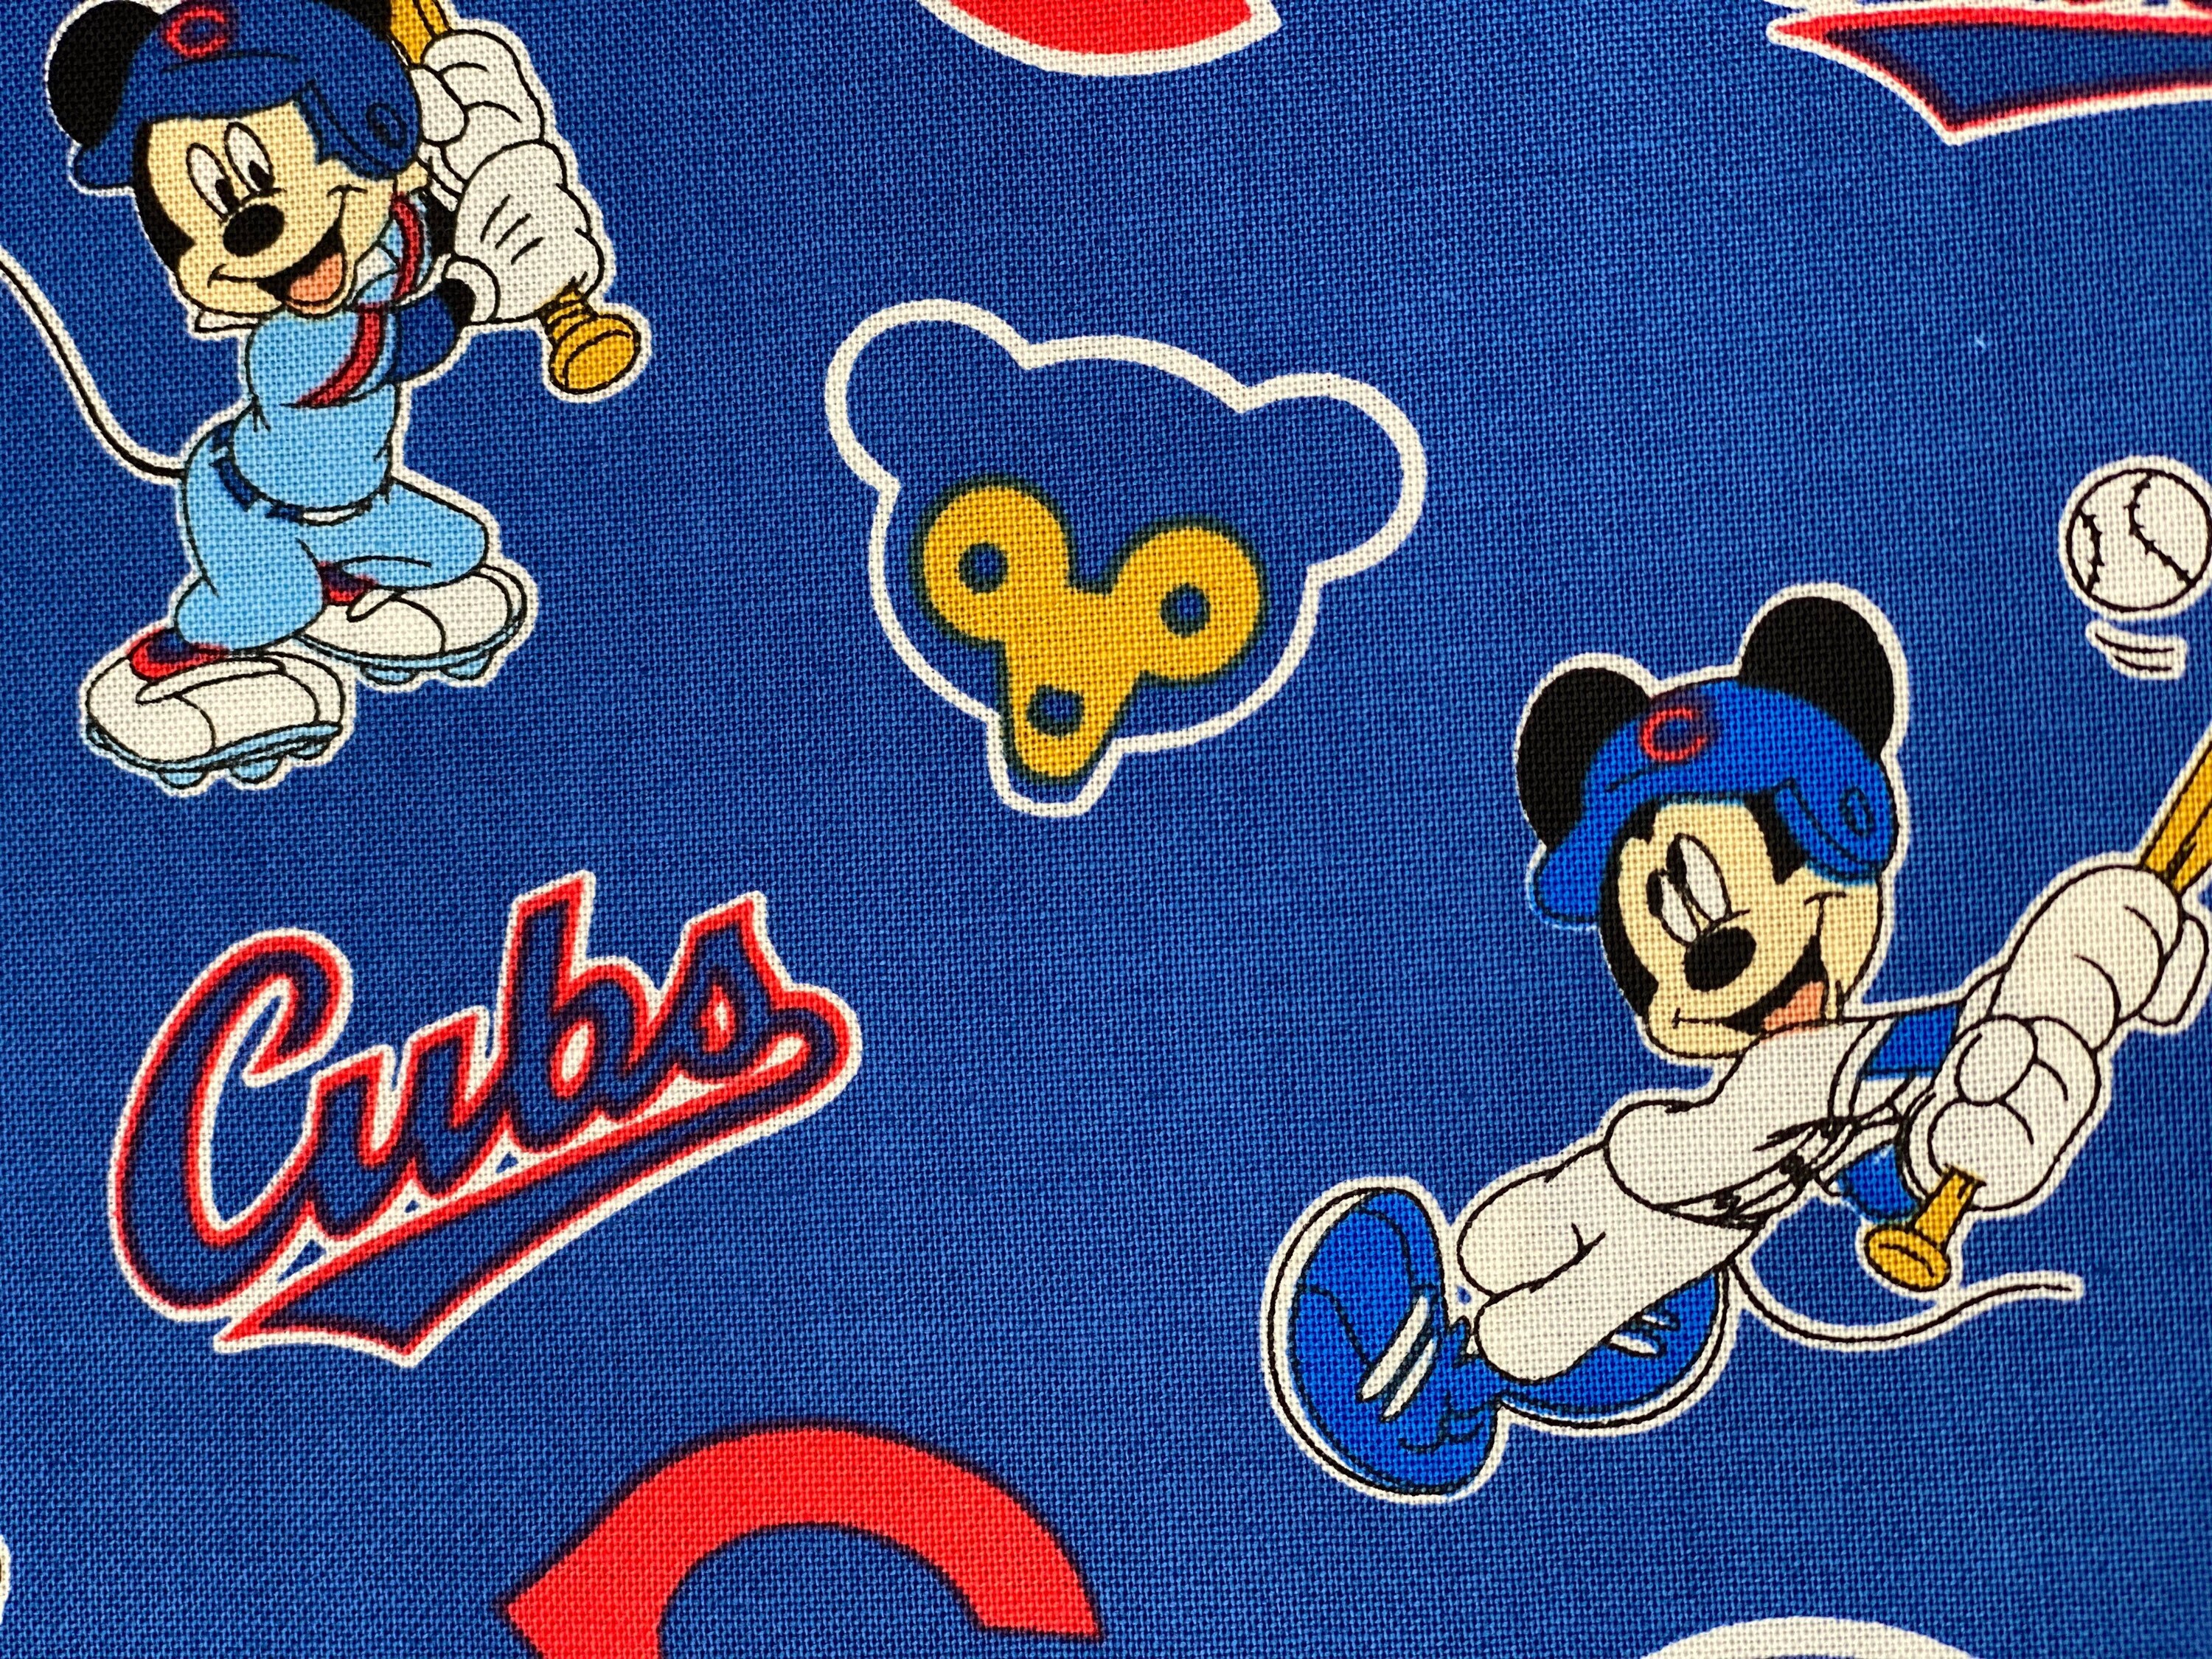 Chicago Cubs MLB baseball fabric mash-up with Mickey Mouse, cotton fabric,  fabric traditions